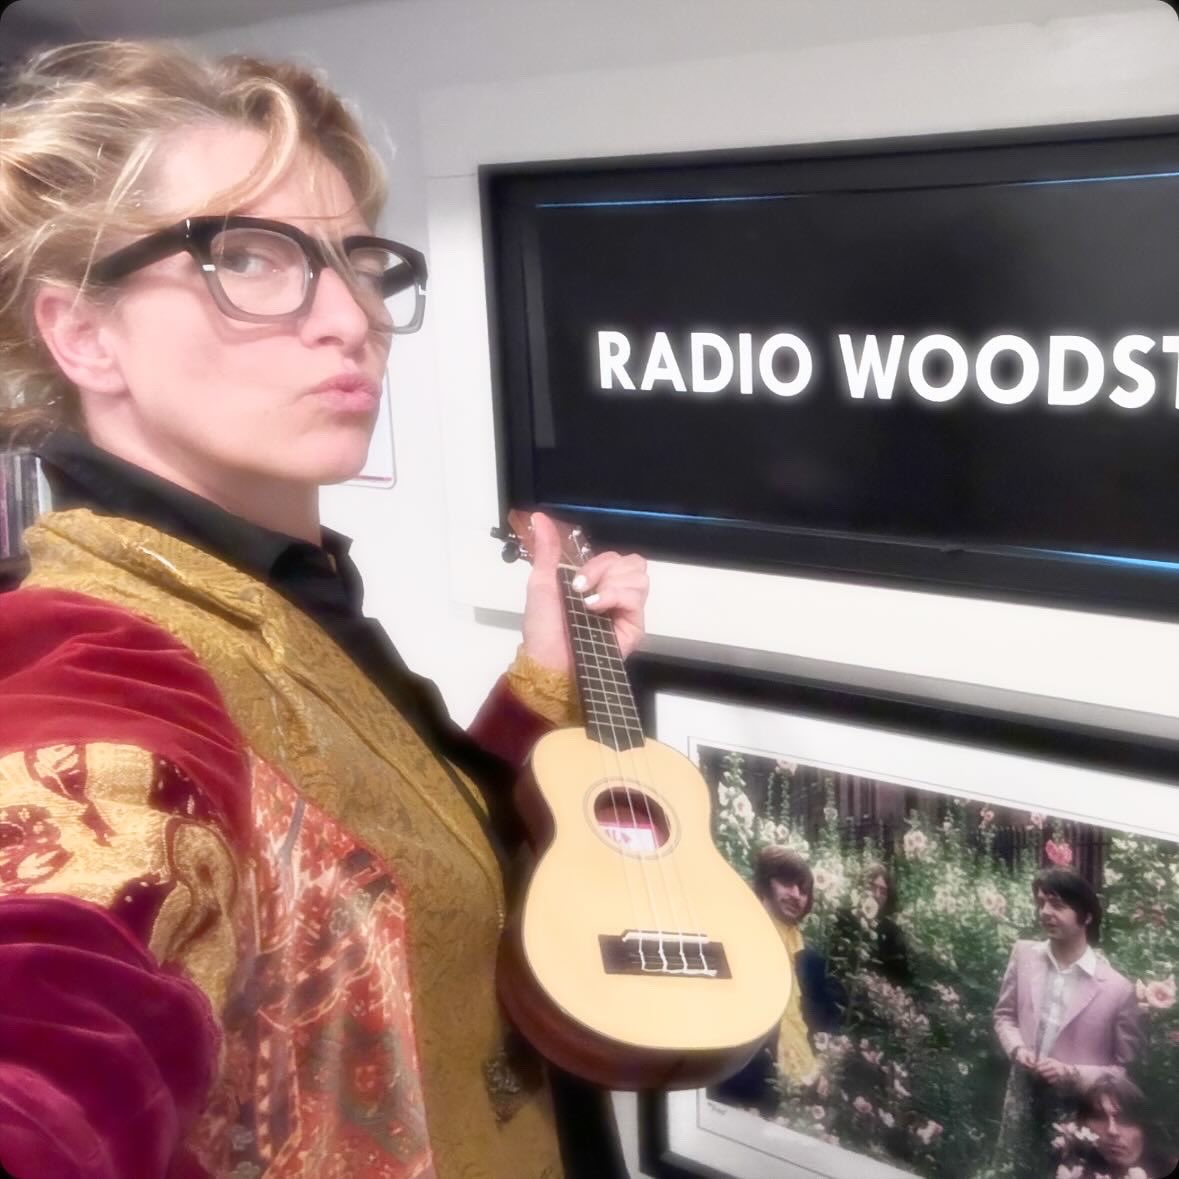 I’m going to be chatting live in a few minutes on @RadioWoodstock at 2:30 EST today (May 9th) for about a half an hour! Dolls, venue, life plans…and all that. Tune into 100.1 locally or stream from anywhere around the globe at radiowoodstock.com/wdst/index